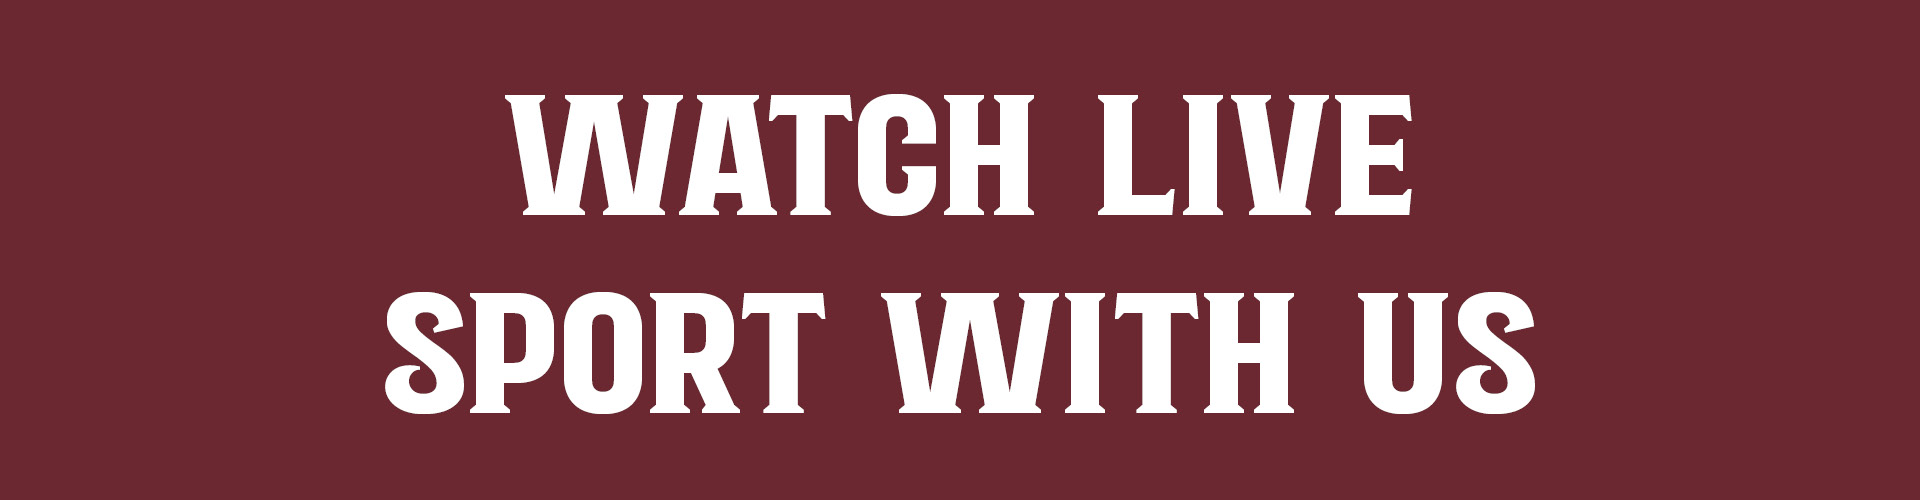 Watch live sport in Bolton at The Elephant & Castle pub